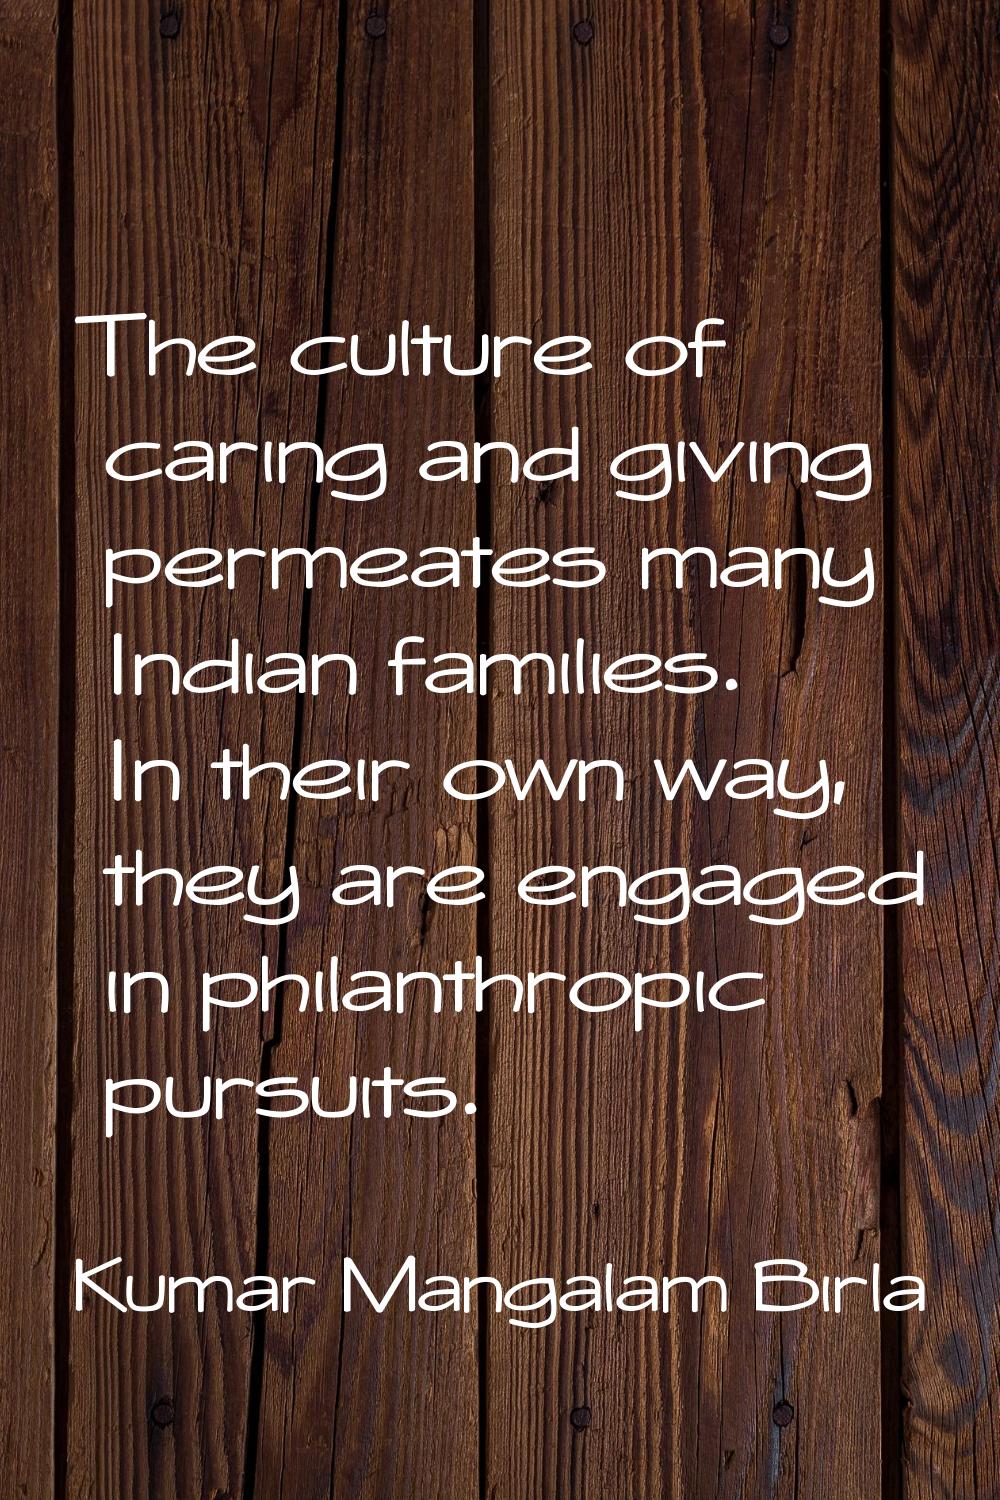 The culture of caring and giving permeates many Indian families. In their own way, they are engaged